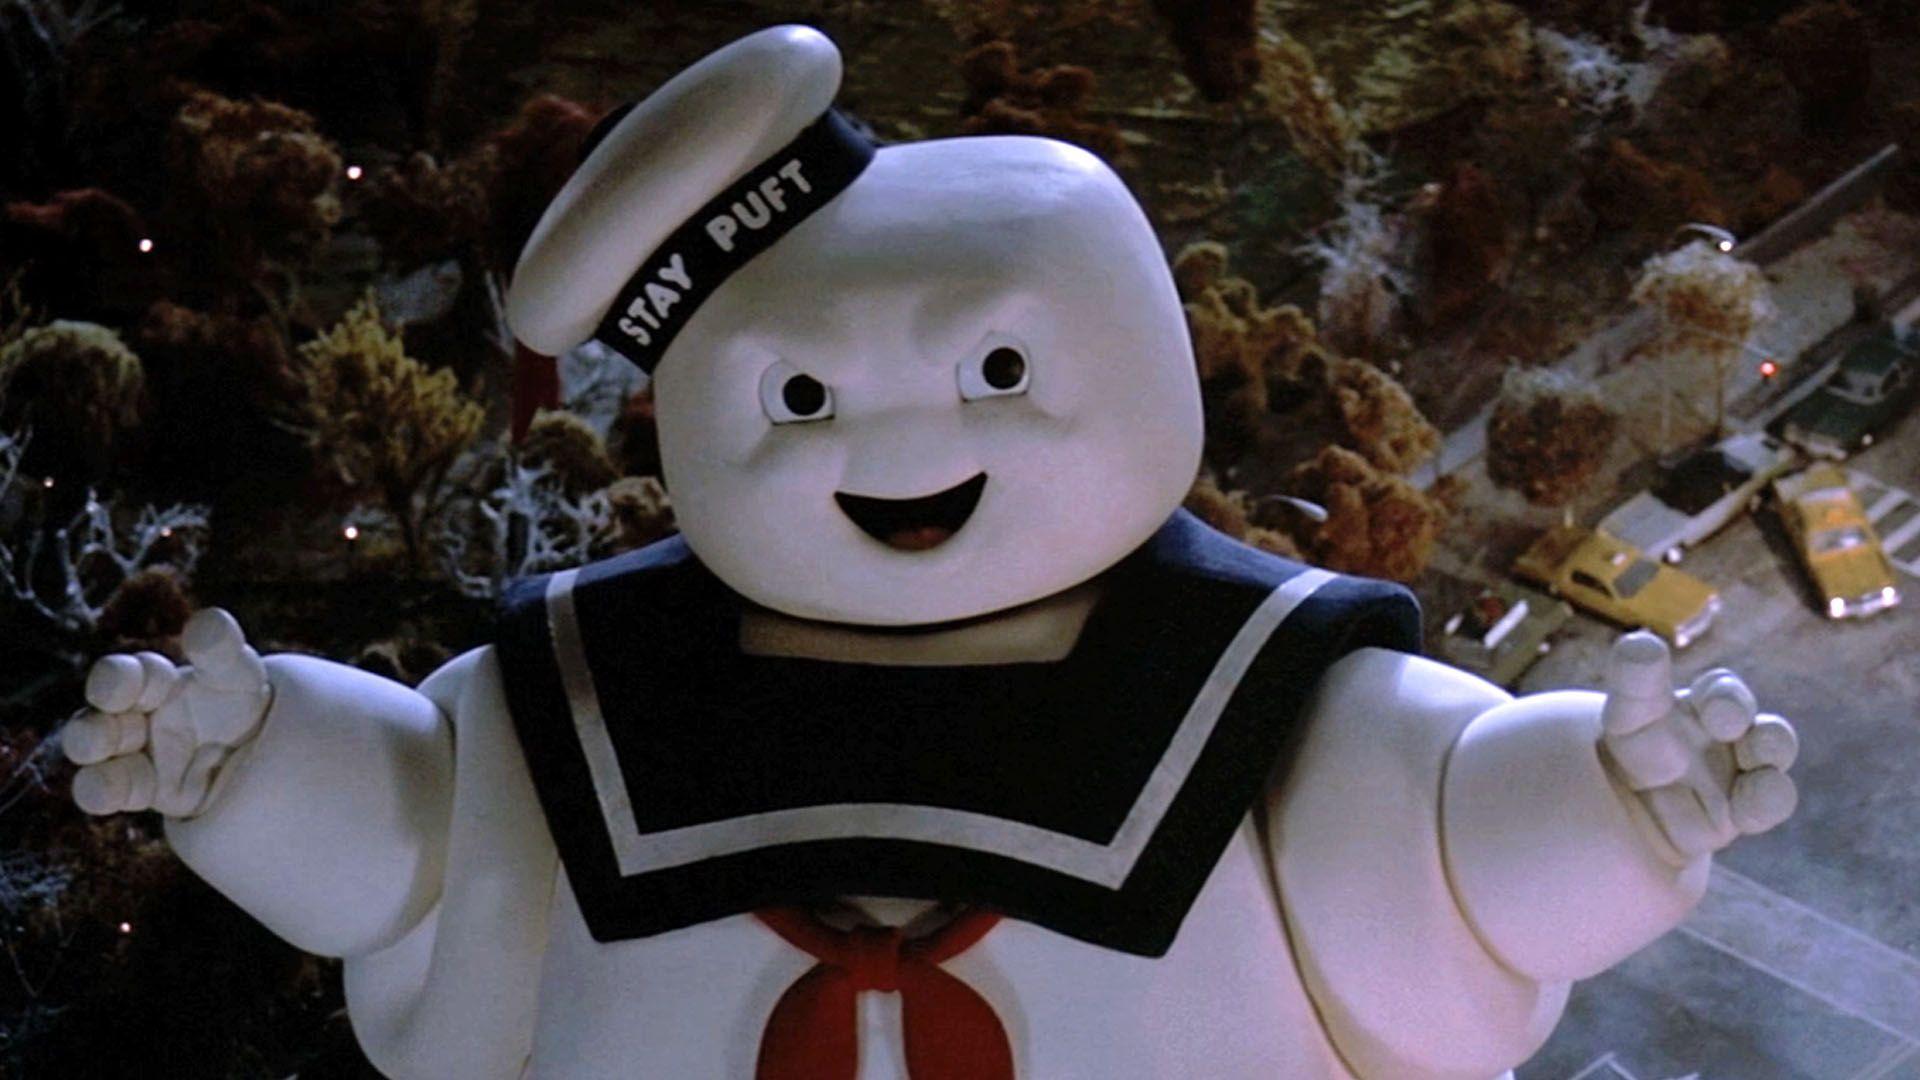 Japan's Monstrous Stay Puft Burger Is Made of Marshmallows